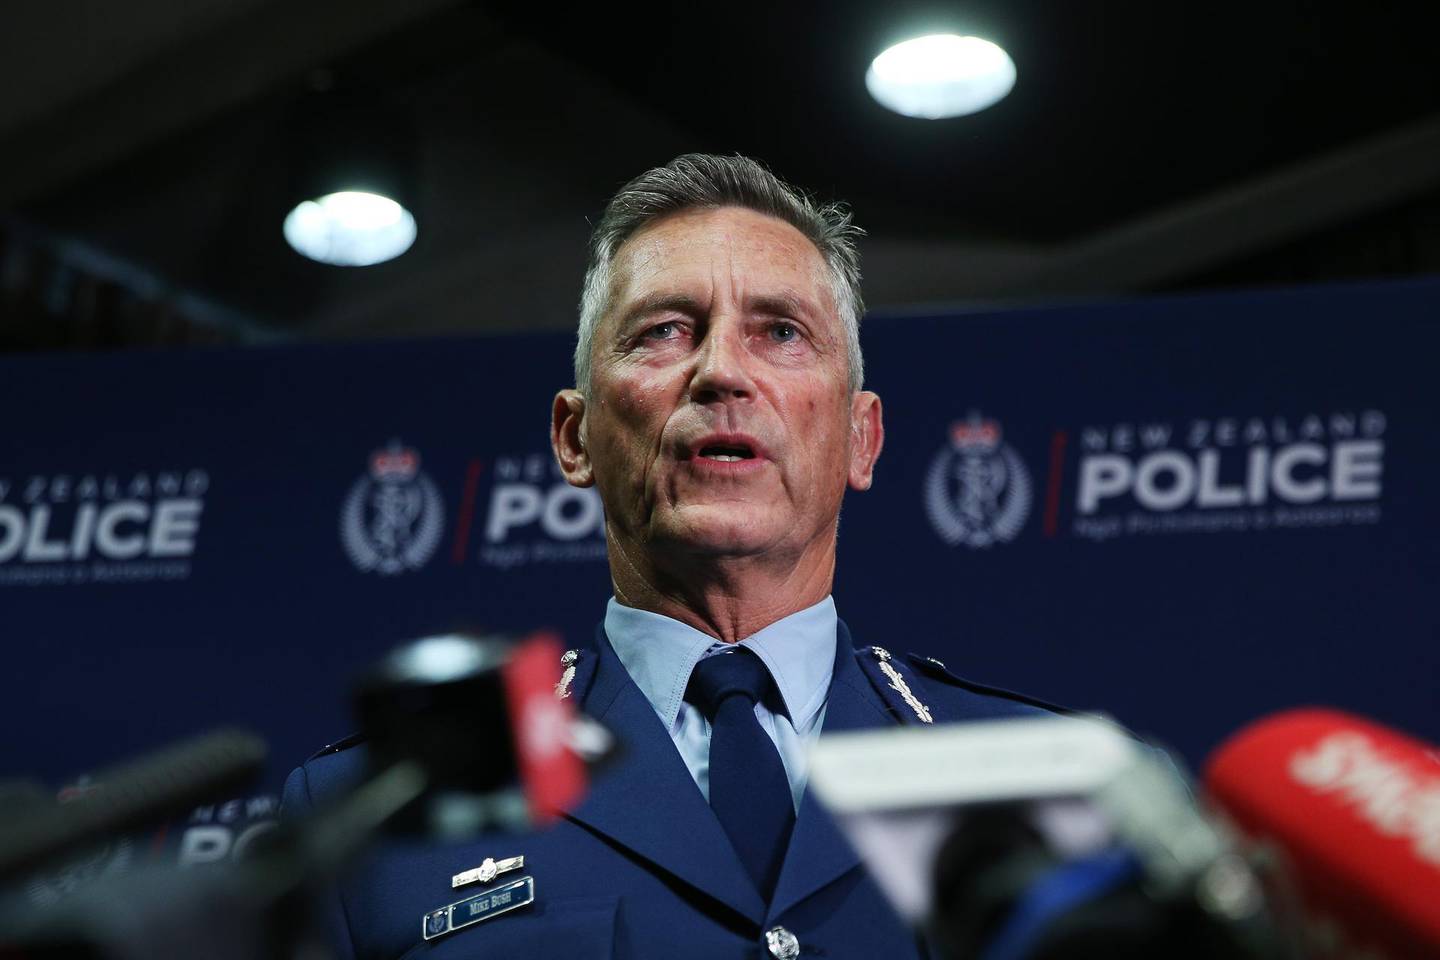 WELLINGTON, NEW ZEALAND - MARCH 15: Police Commissioner Mike Bush speaks to media during a press conference at Royal Society Te Aparangi on March 15, 2019 in Wellington, New Zealand. One person is in custody and police are searching for another gunmen following several shootings at mosques in Christchurch. Police have not confirmed the number of casualties or fatalities. All schools and businesses are in lock down as police continue to search for other gunmen. (Photo by Hagen Hopkins/Getty Images)